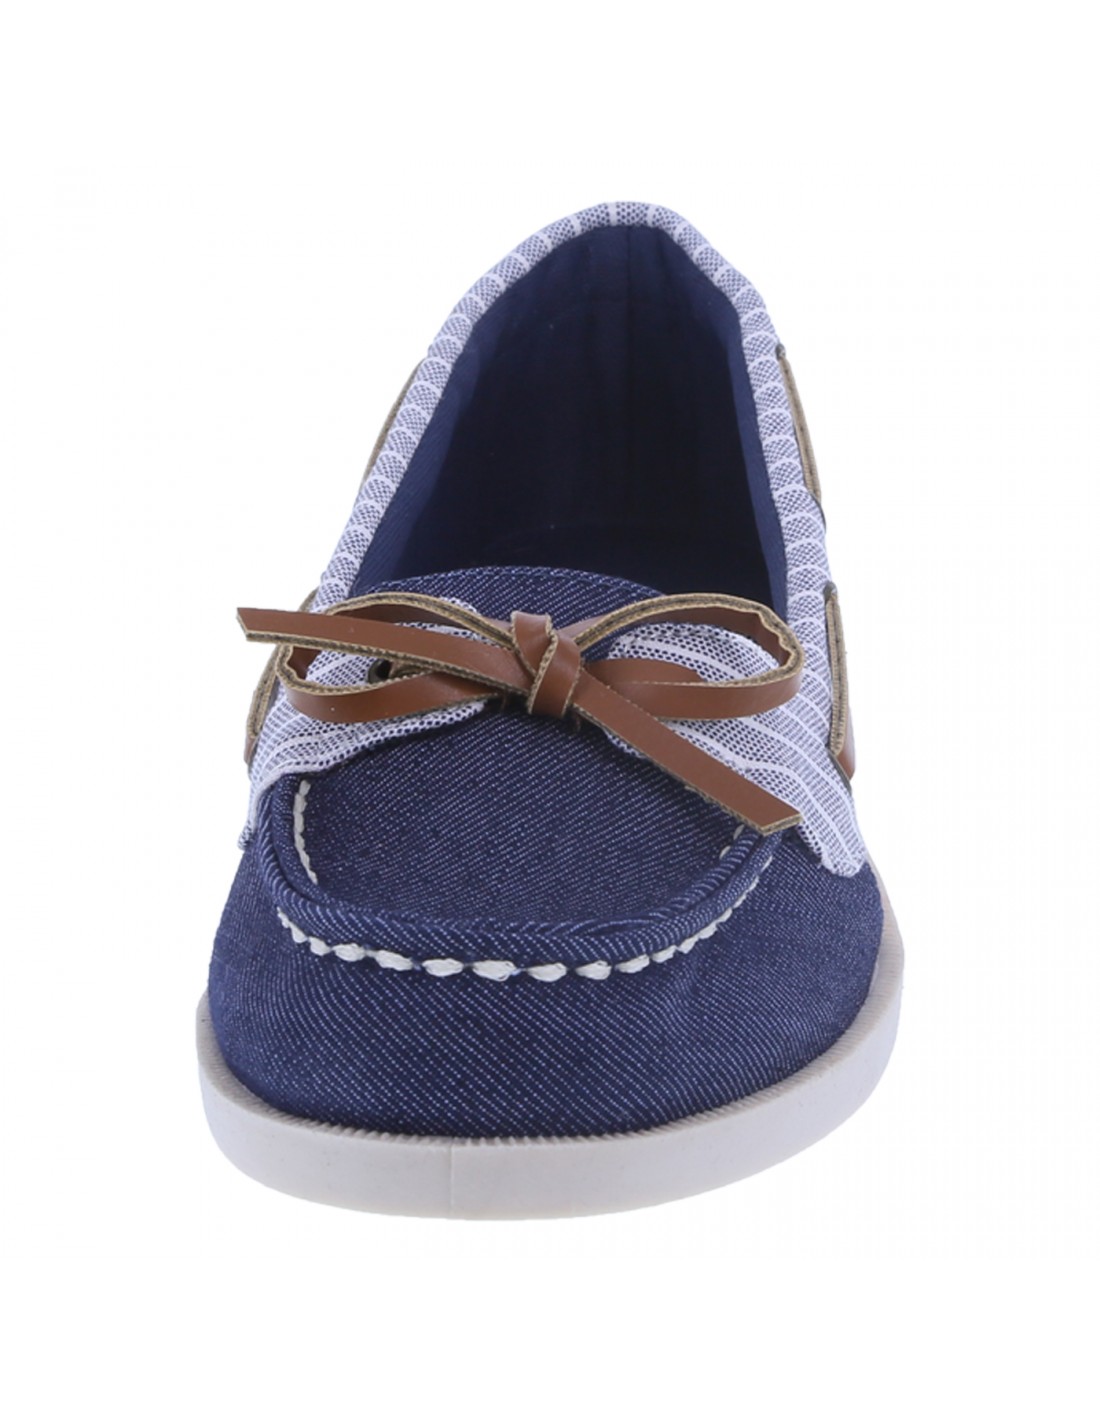 womens boat shoes payless